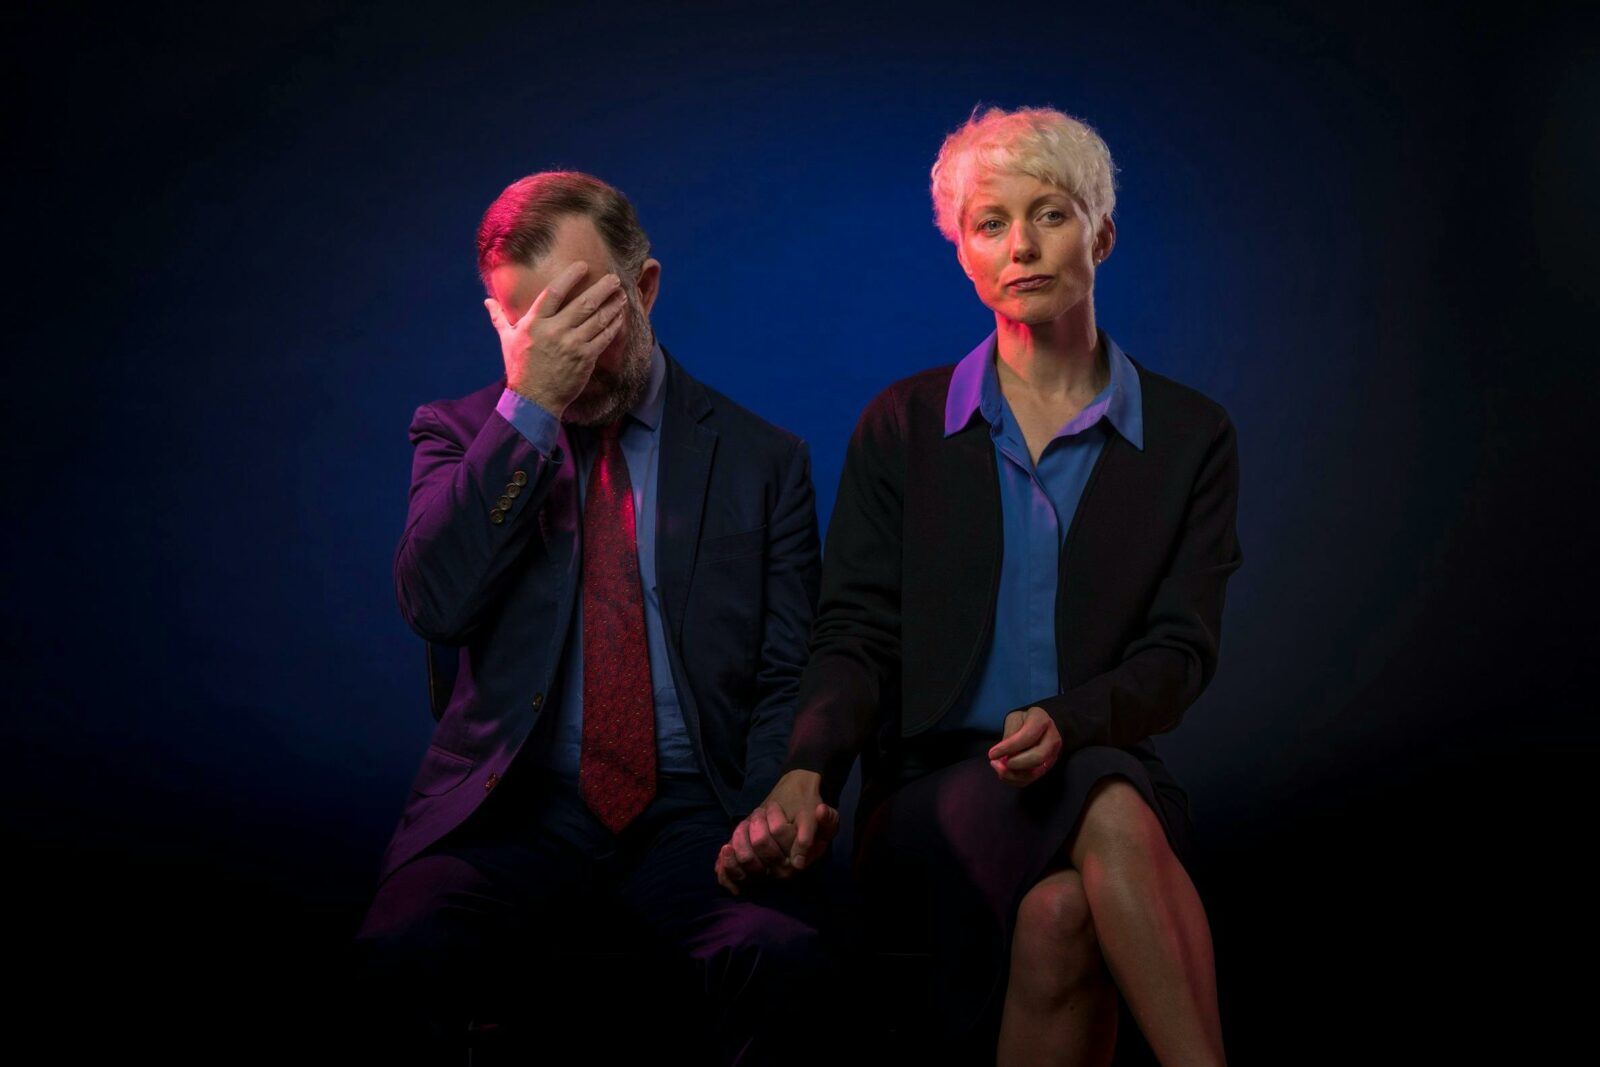 A man and a woman sit side by side against a blue background. The man has his hand over his face.